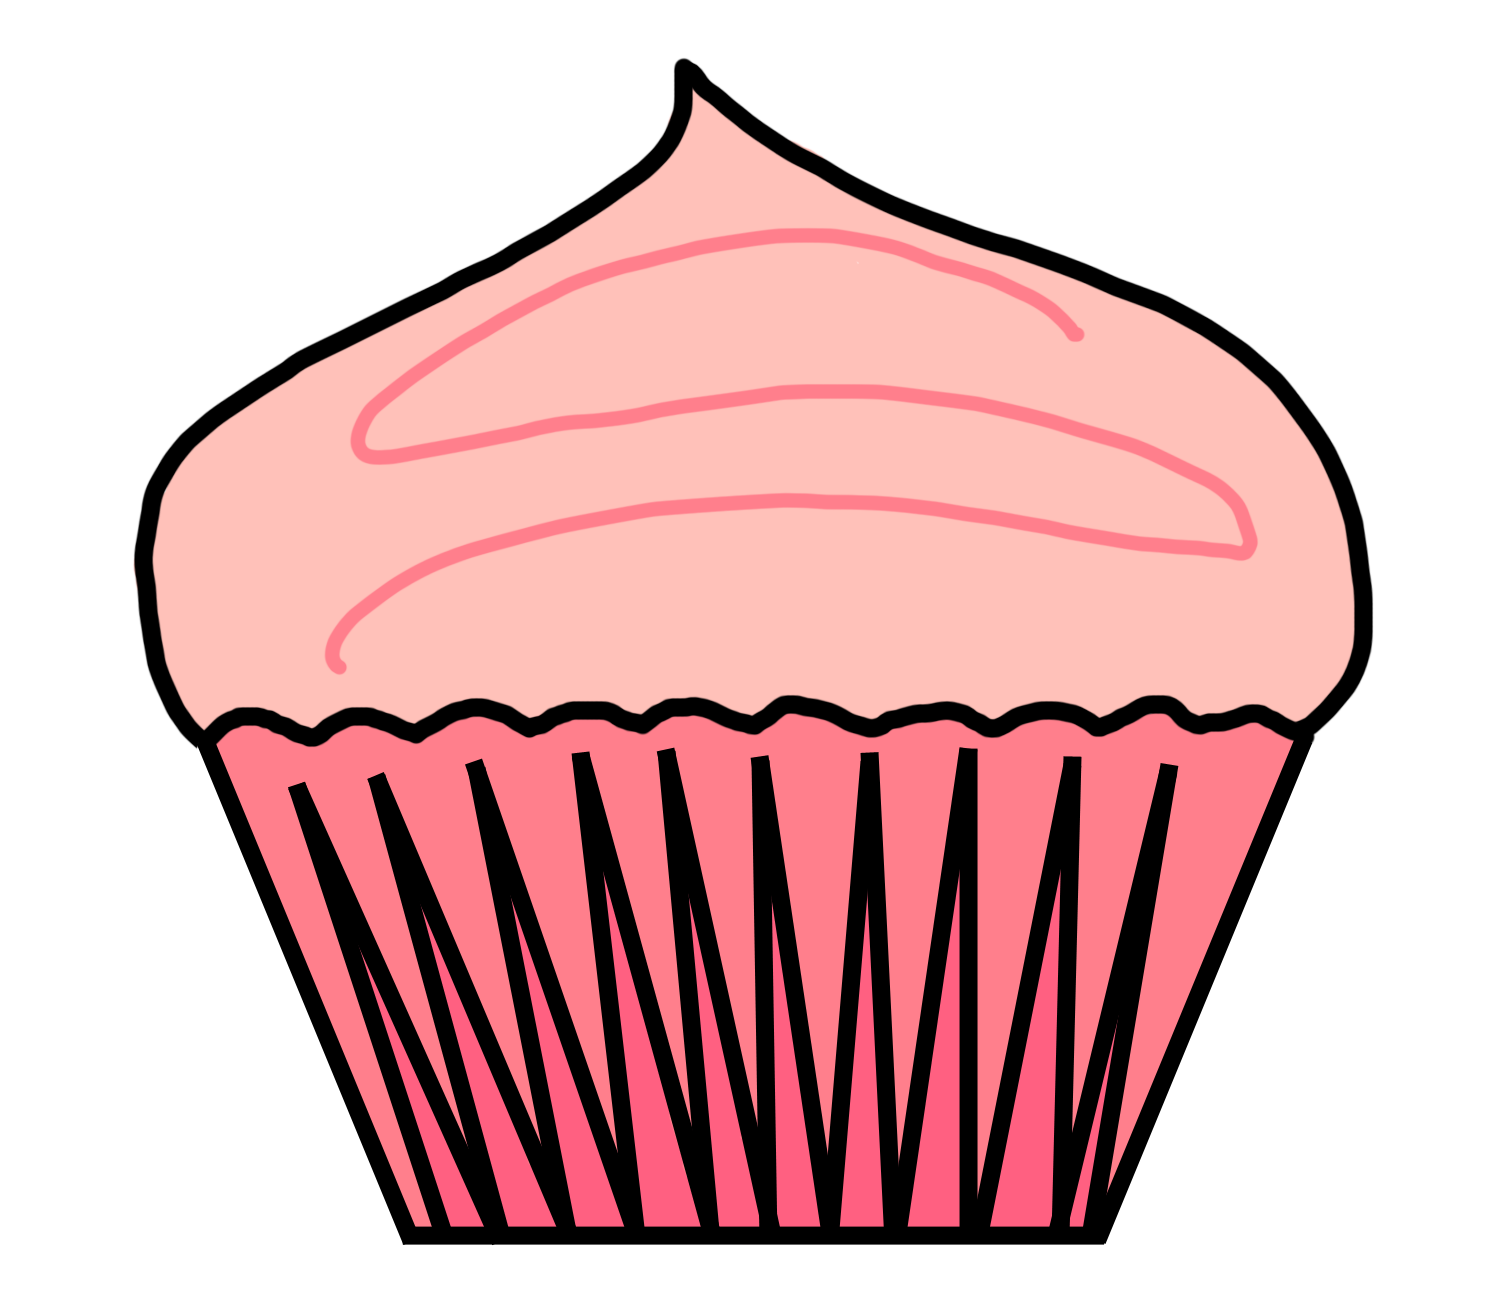 Pink Cupcakes Background | Clipart Panda - Free Clipart Images